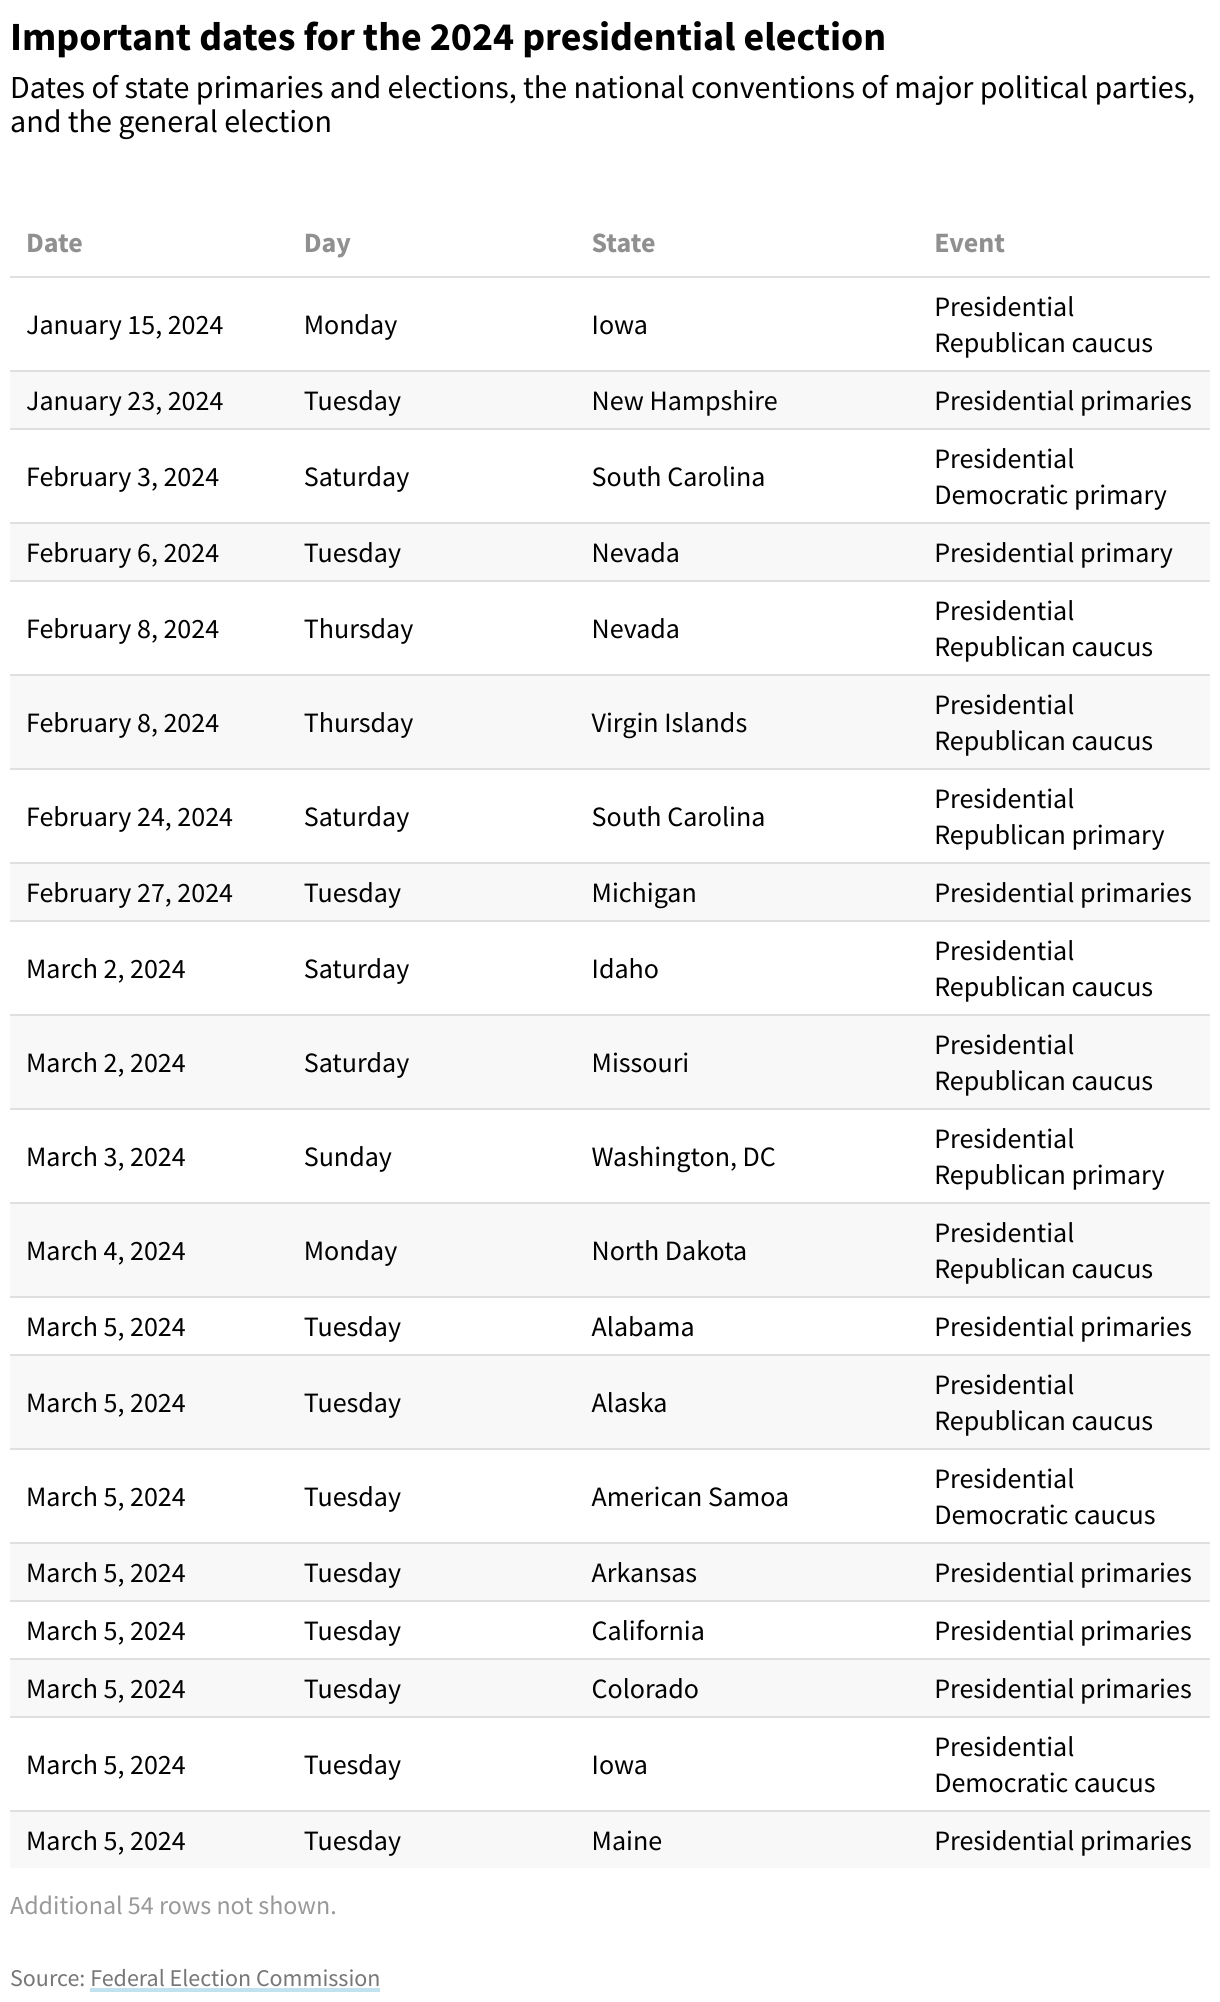 A table of all Democratic and Republican presidential caucuses and primaries for the 2024 presidential election.